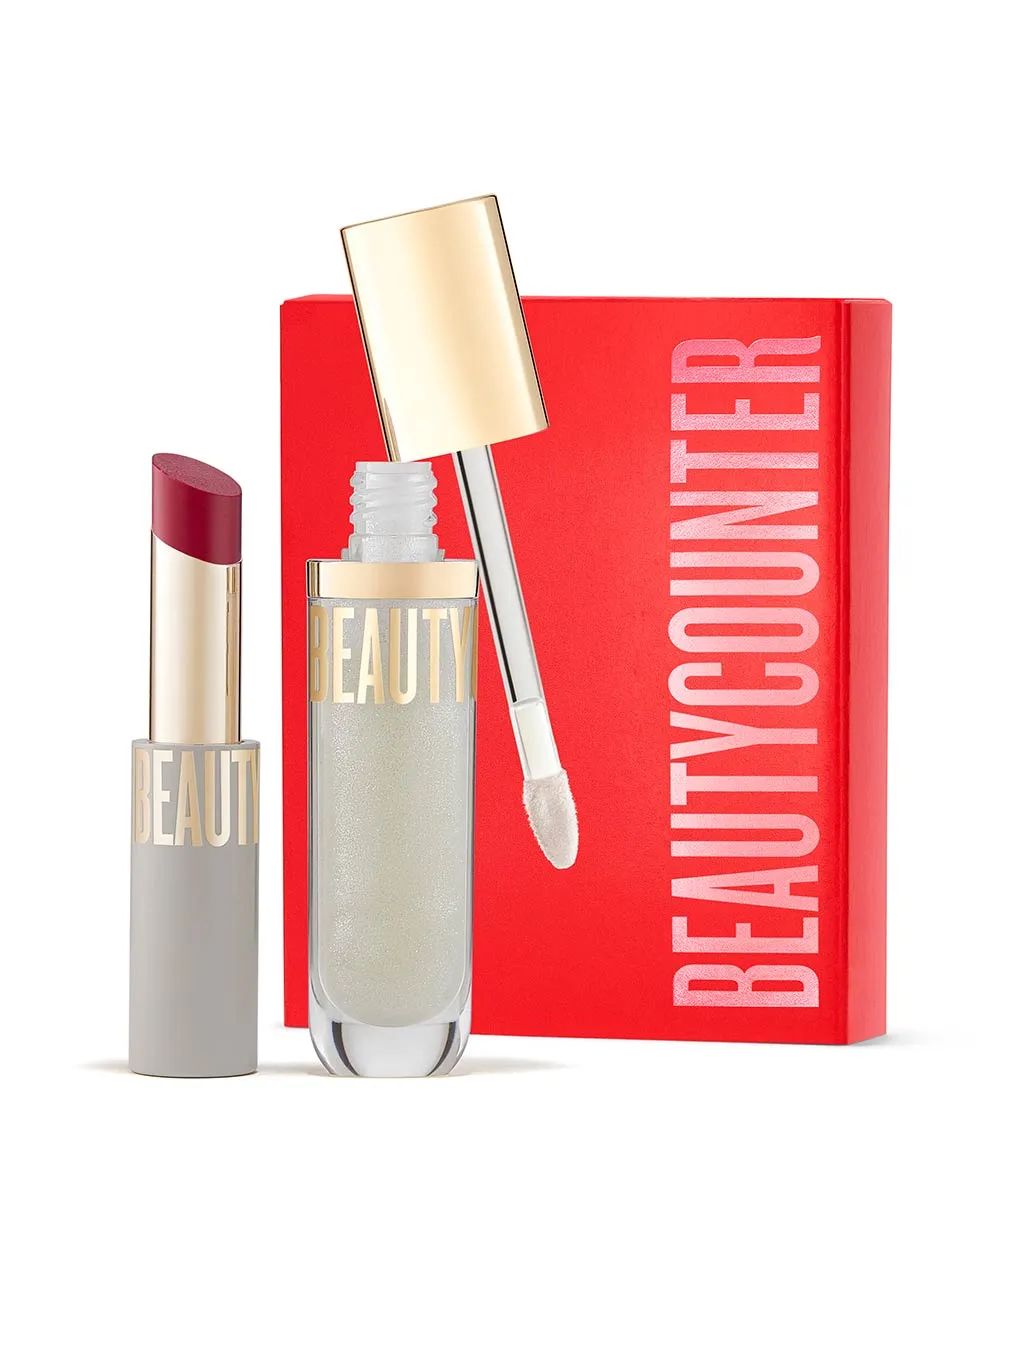 At the Red-y Lip Duo - Beautycounter - Skin Care, Makeup, Bath and Body and more! | Beautycounter.com